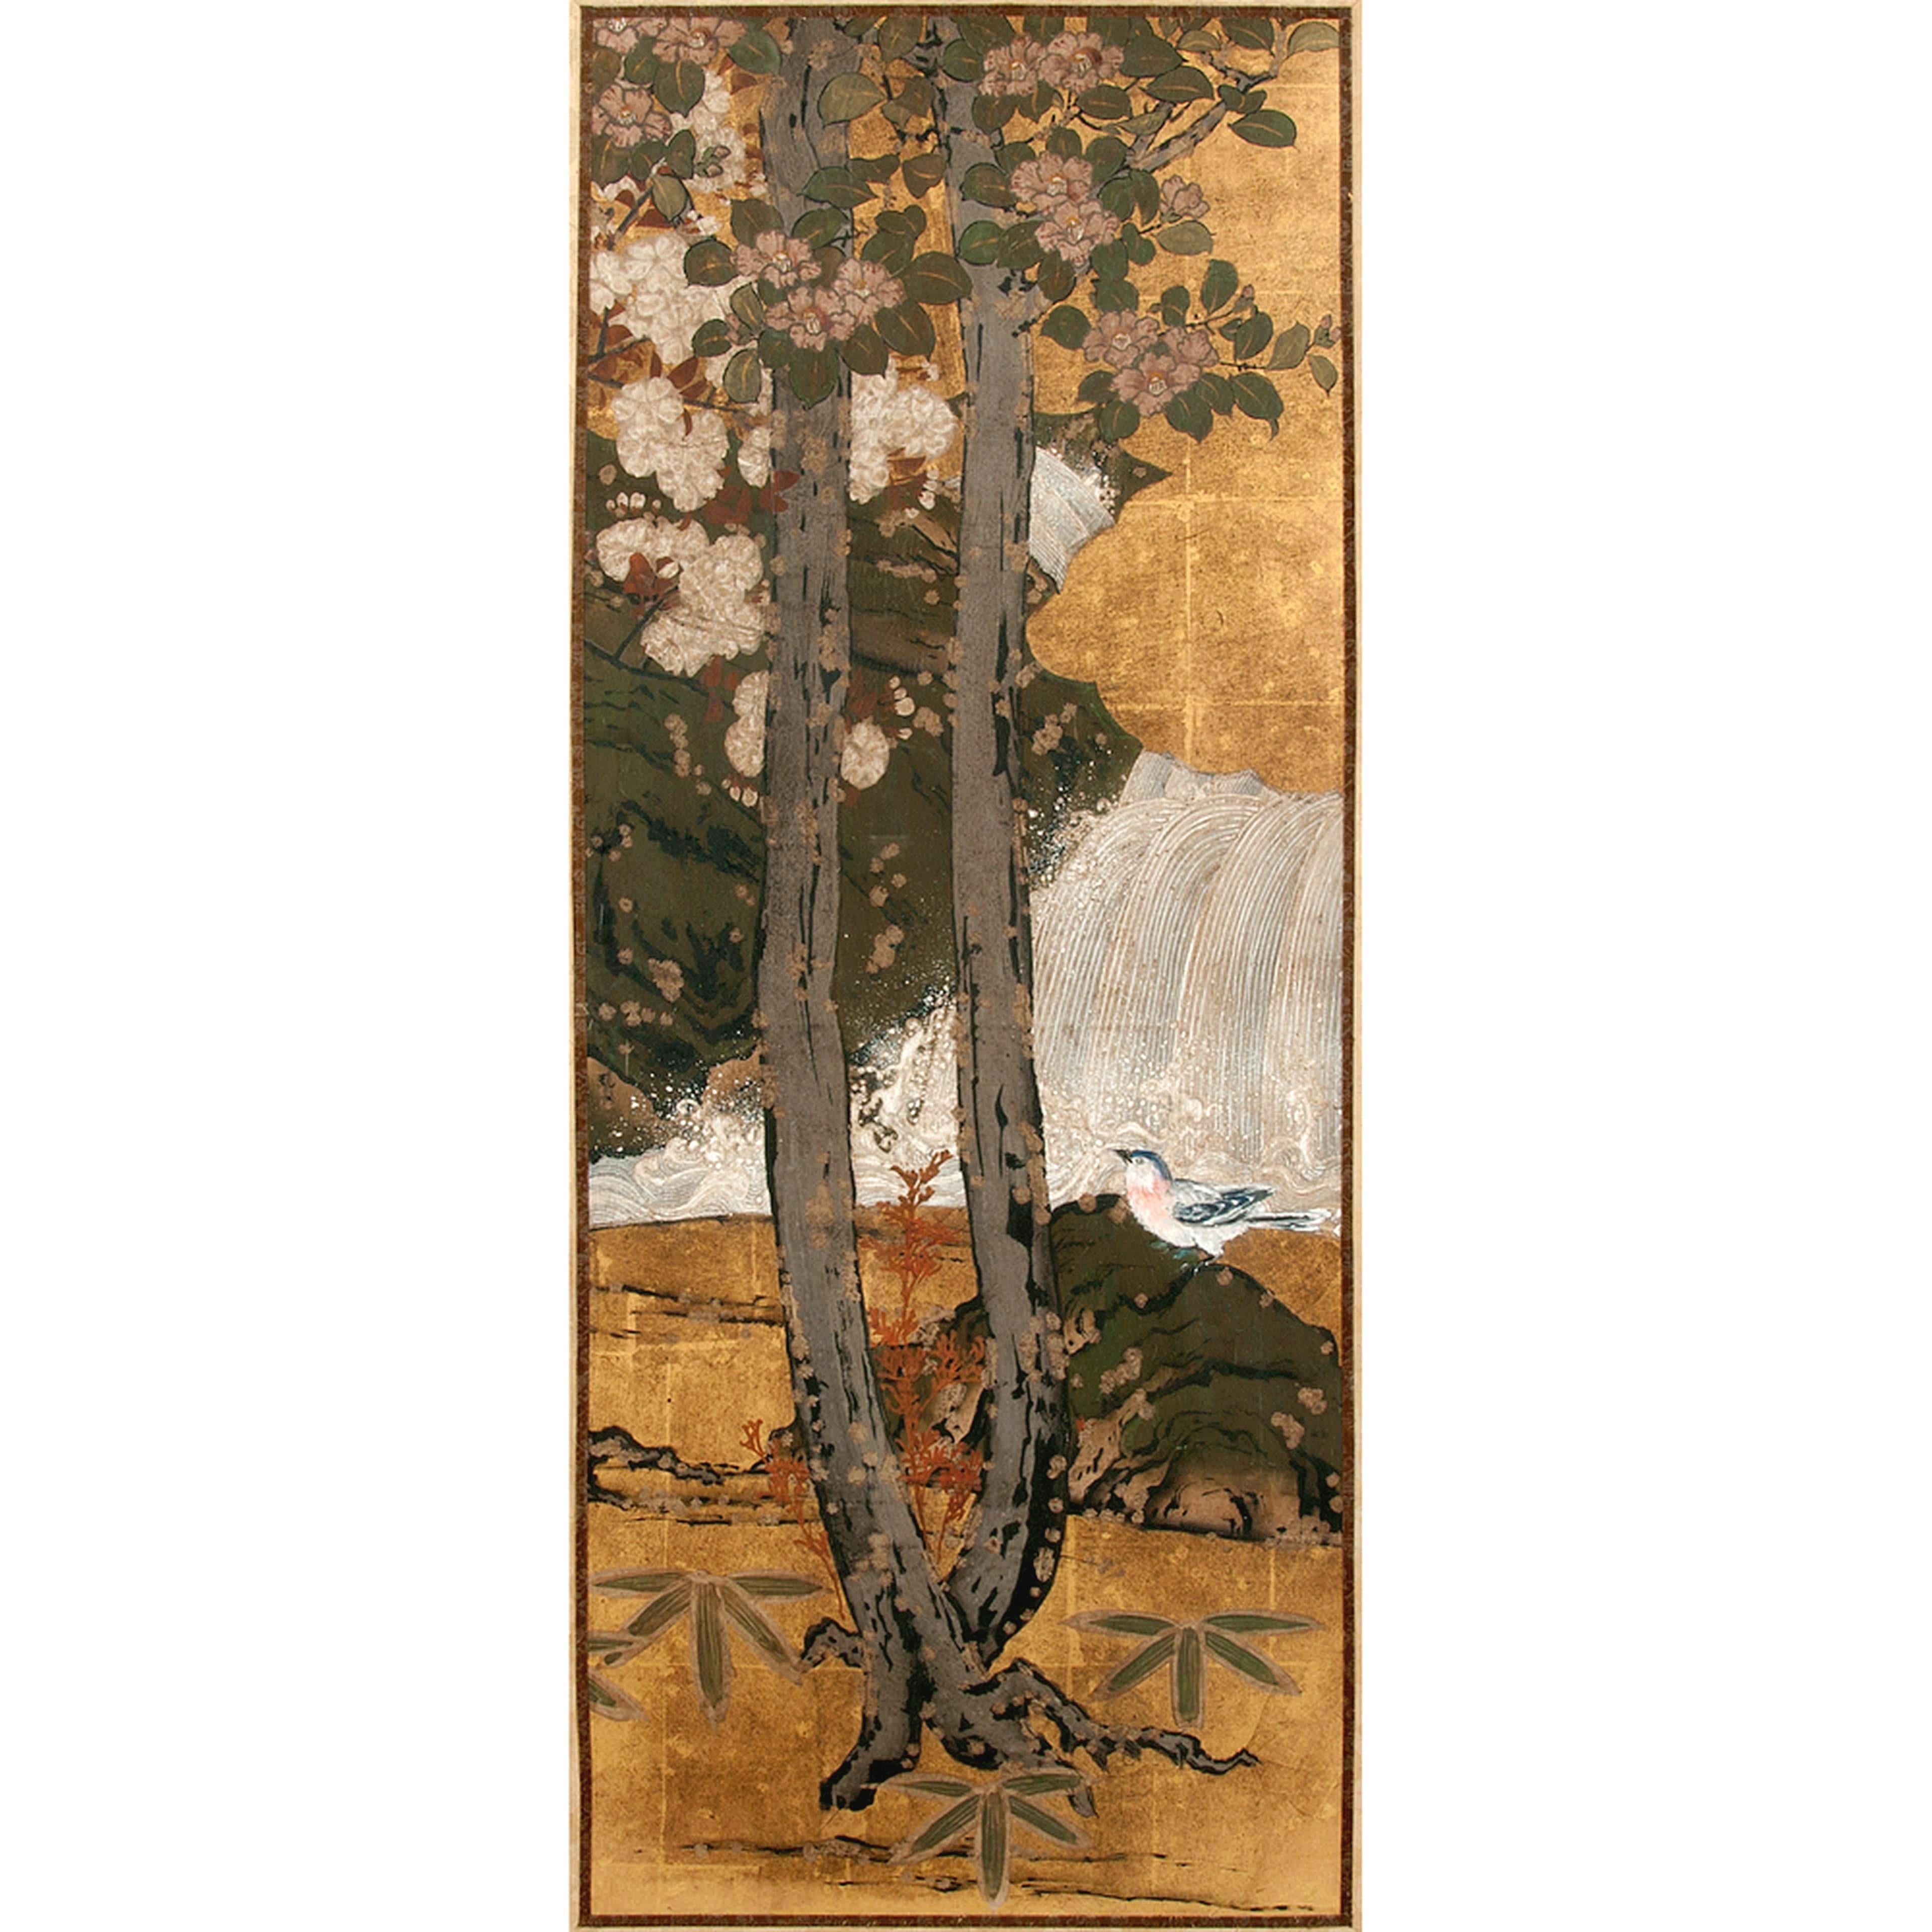 Framed Japanese landscape painting circa 1830s, the late Edo Period, possibly a panel from an antique floor screen. The painting was executed in the Rimpa style, depicting a tranquil forest scene with two towering magnolia trees in duel color